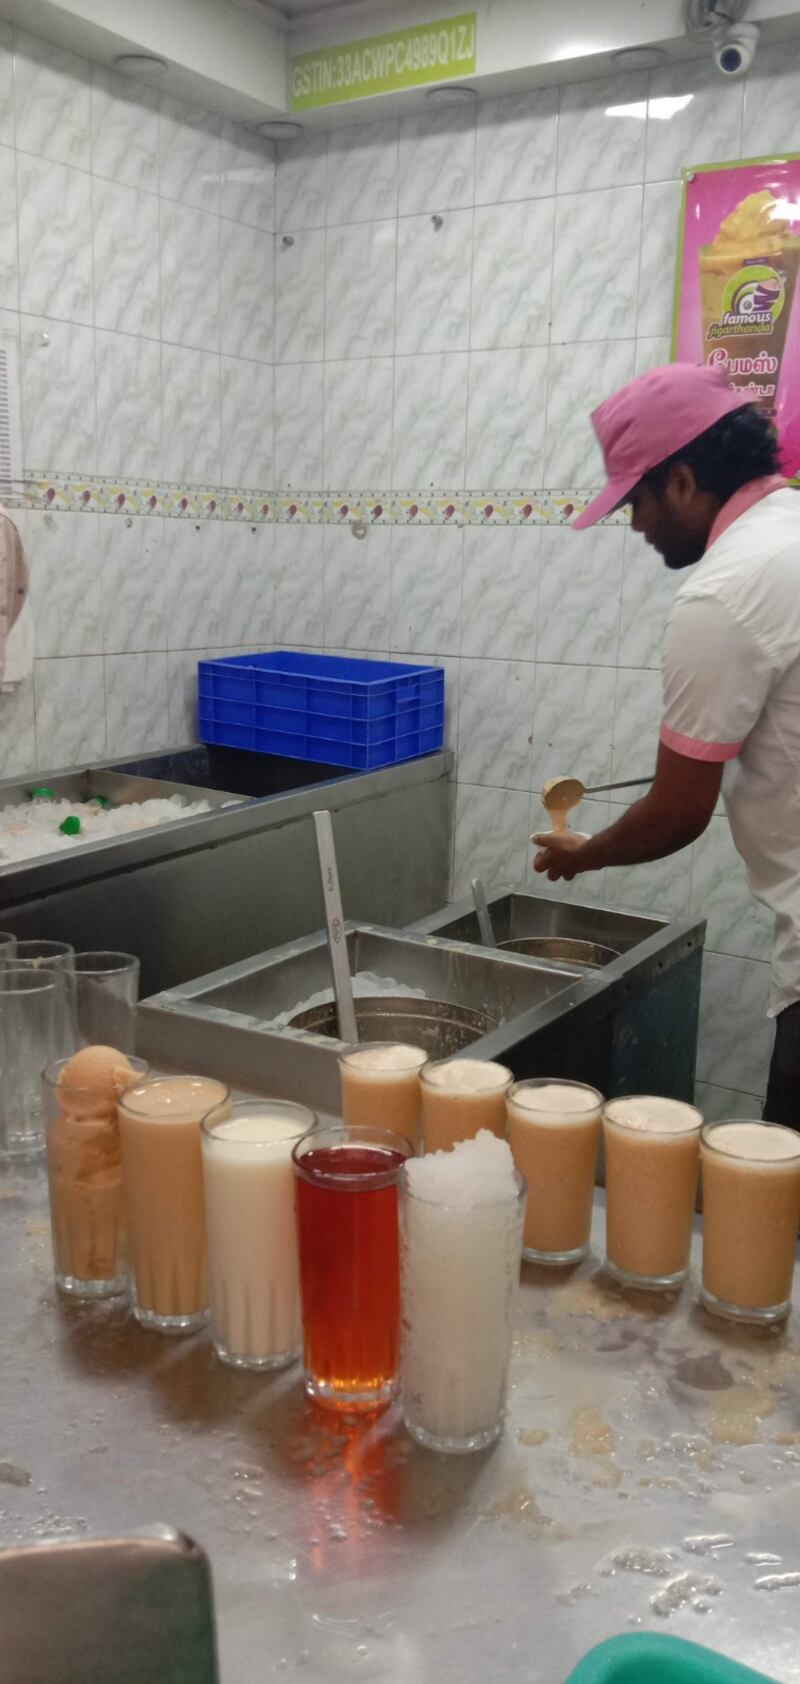 The ingredients that go into jigarthanda, of which badam pisin or almond sap, far right, gives the drink its distinct taste and texture